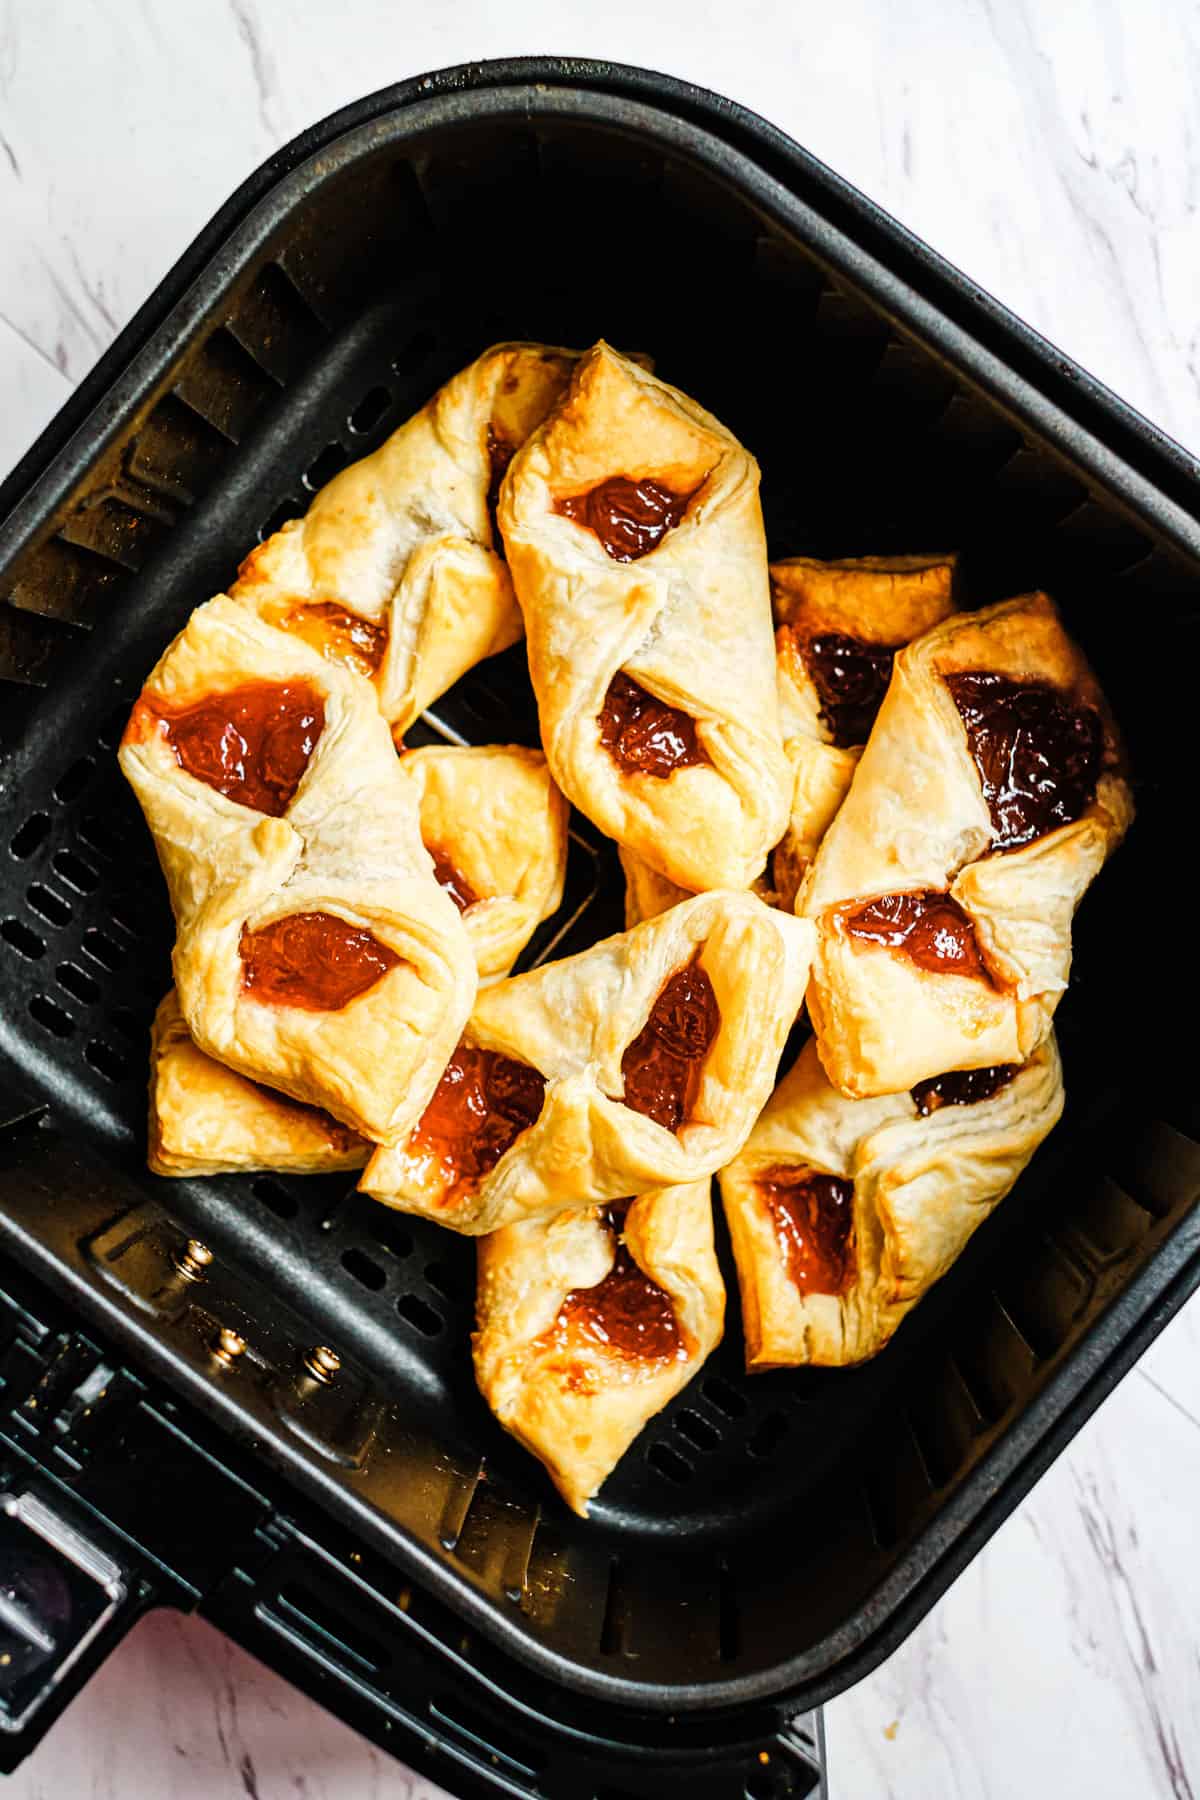 top down view of the cooked puff pastry breakfast bites inside the air fryer basket